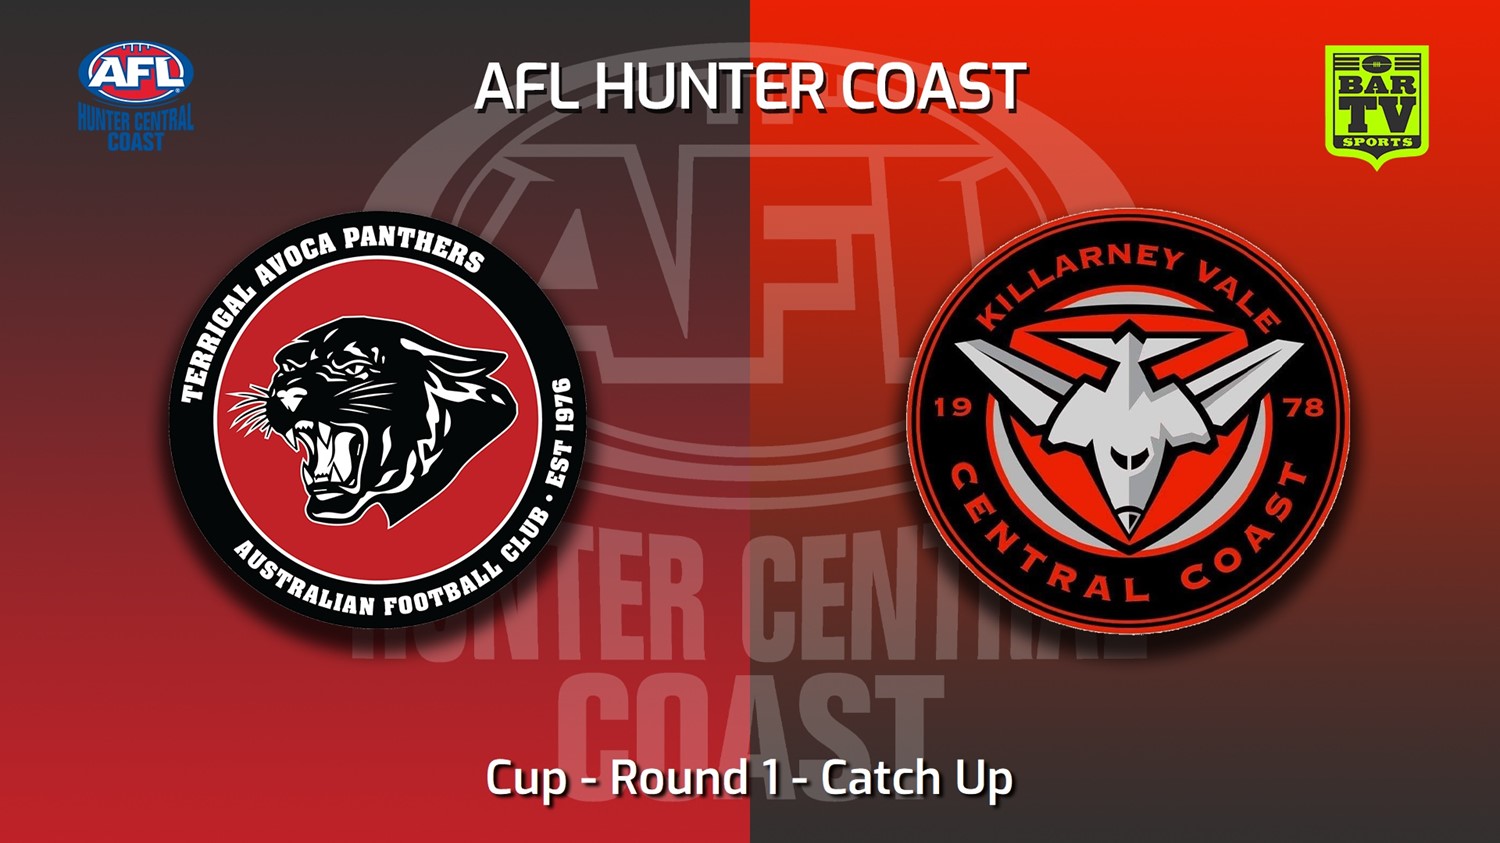 220702-AFL Hunter Central Coast Round 1 - Catch Up - Cup - Terrigal Avoca Panthers v Killarney Vale Bombers Slate Image